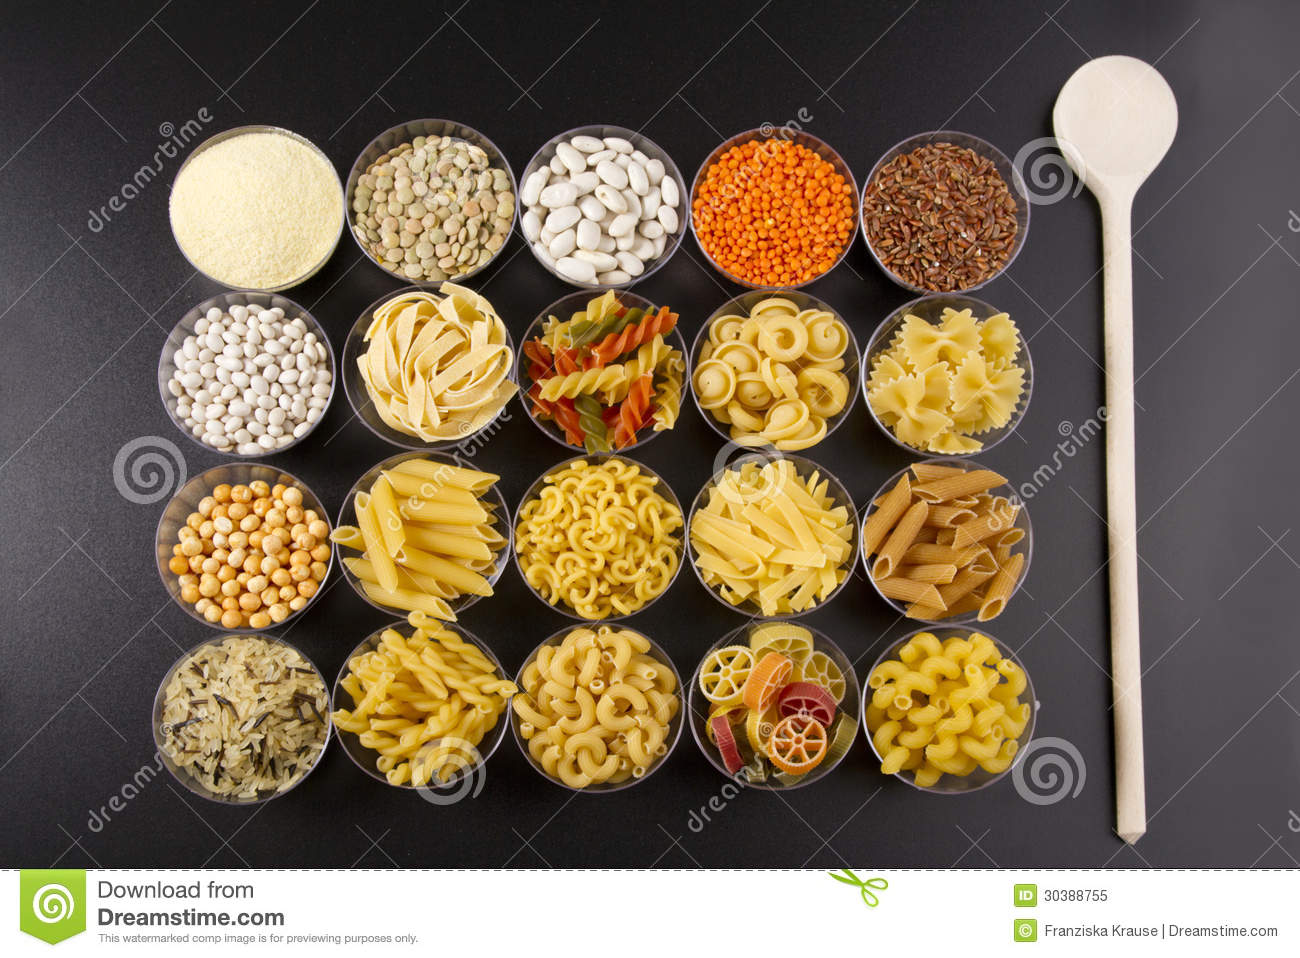 Pasta Rice And Pulses Royalty Free Stock Photo   Image  30388755